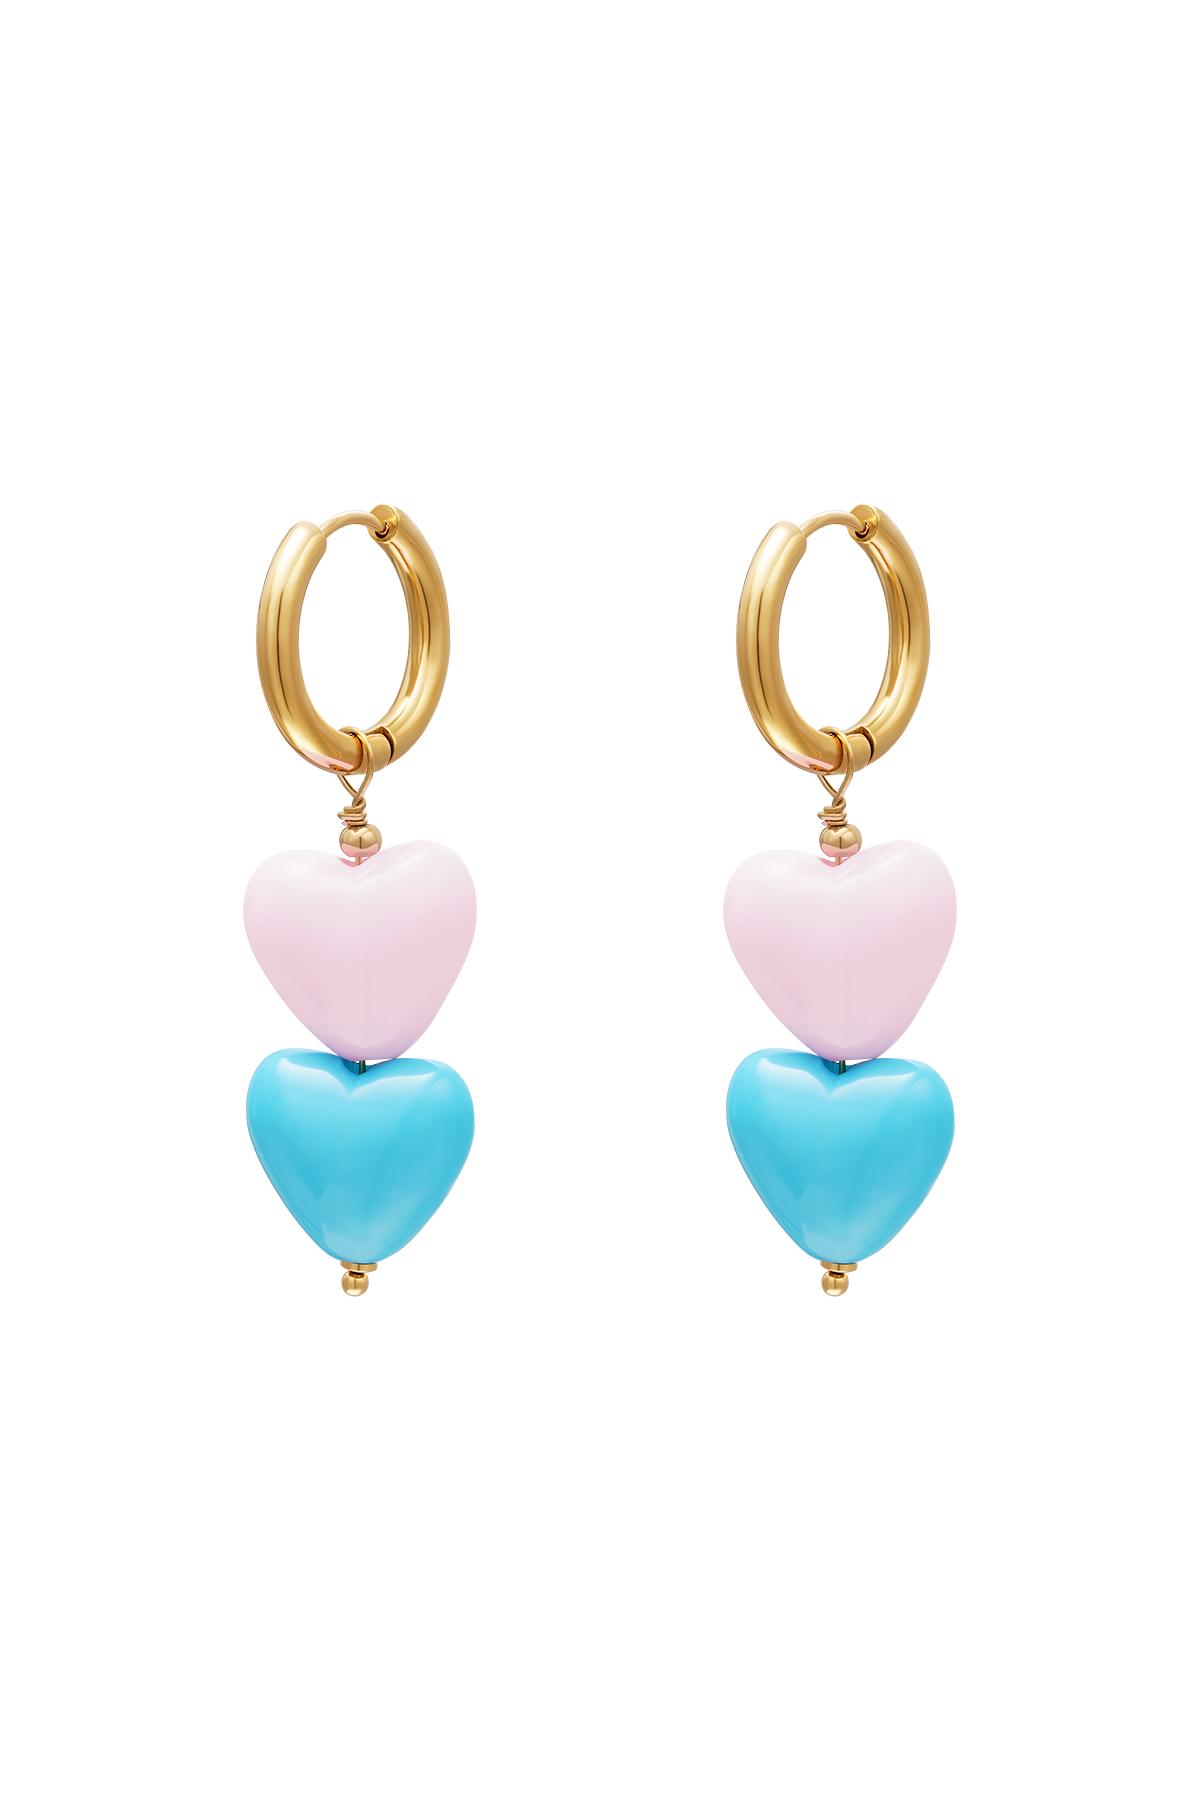 Colourful hearts earrings - #summergirls collection Blue & Gold Stainless Steel 